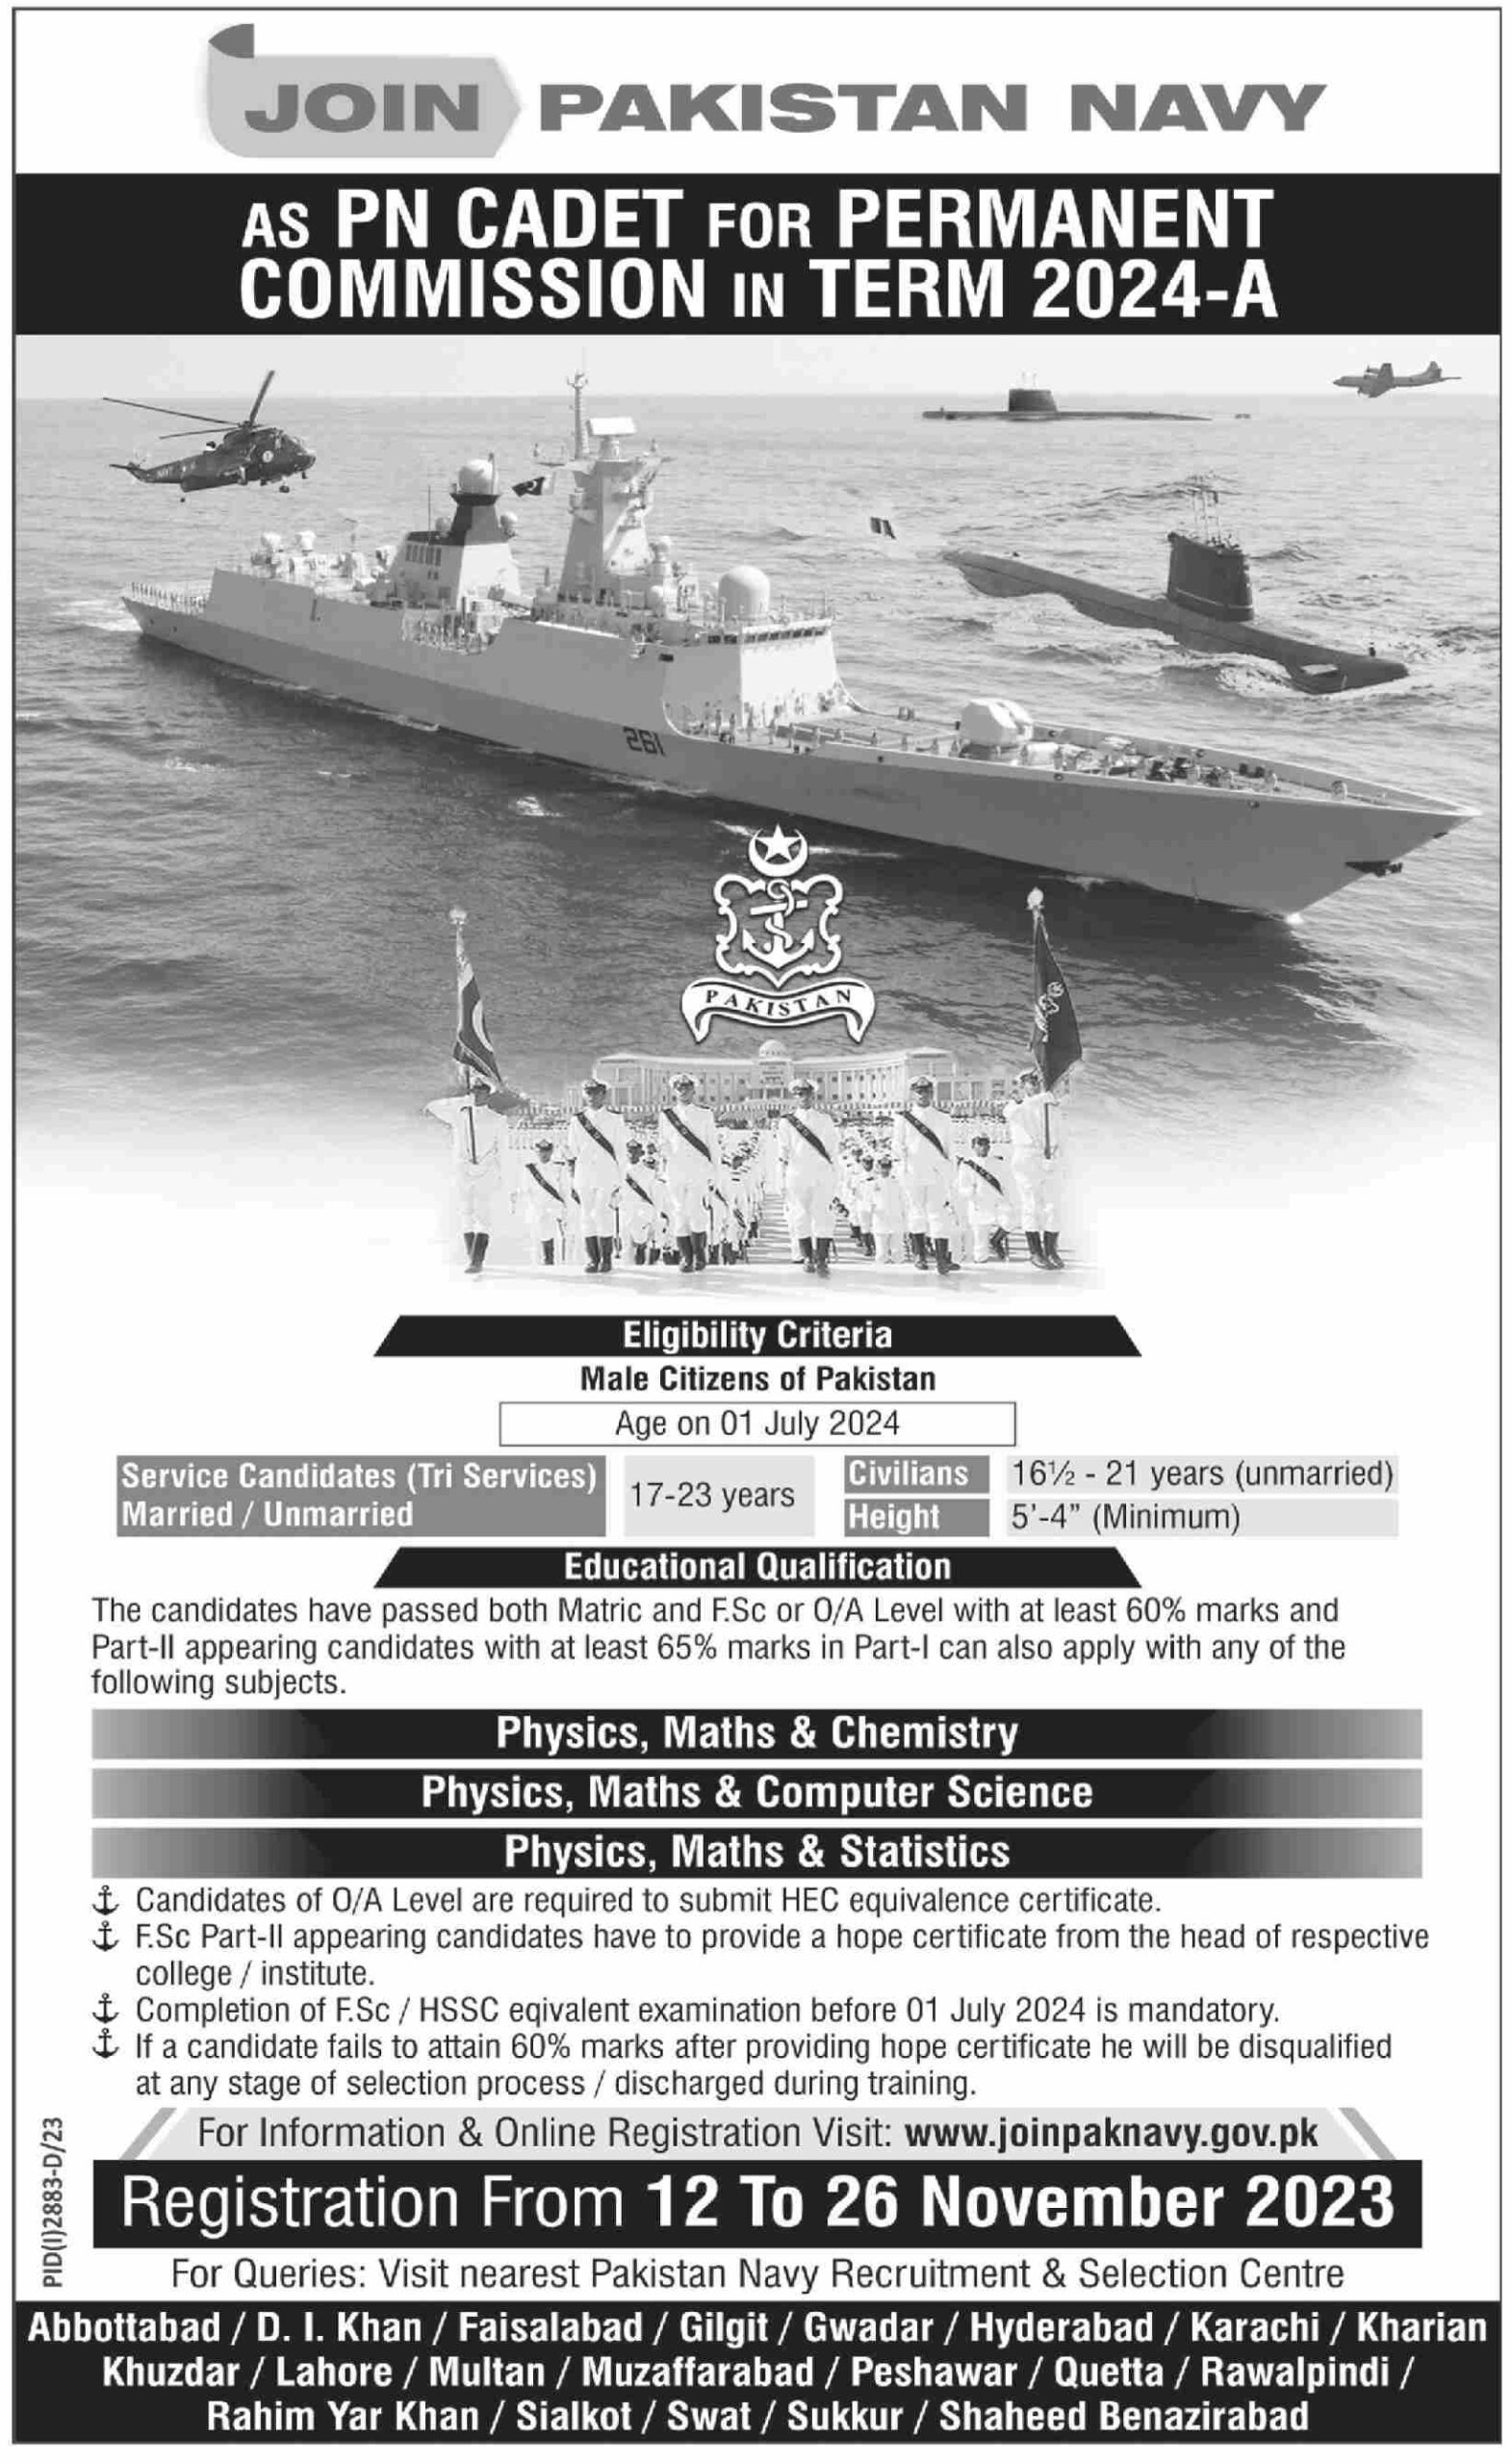 Join Pakistan Navy as PN Cadet For Permanent Commission Term 2024-A Jobs